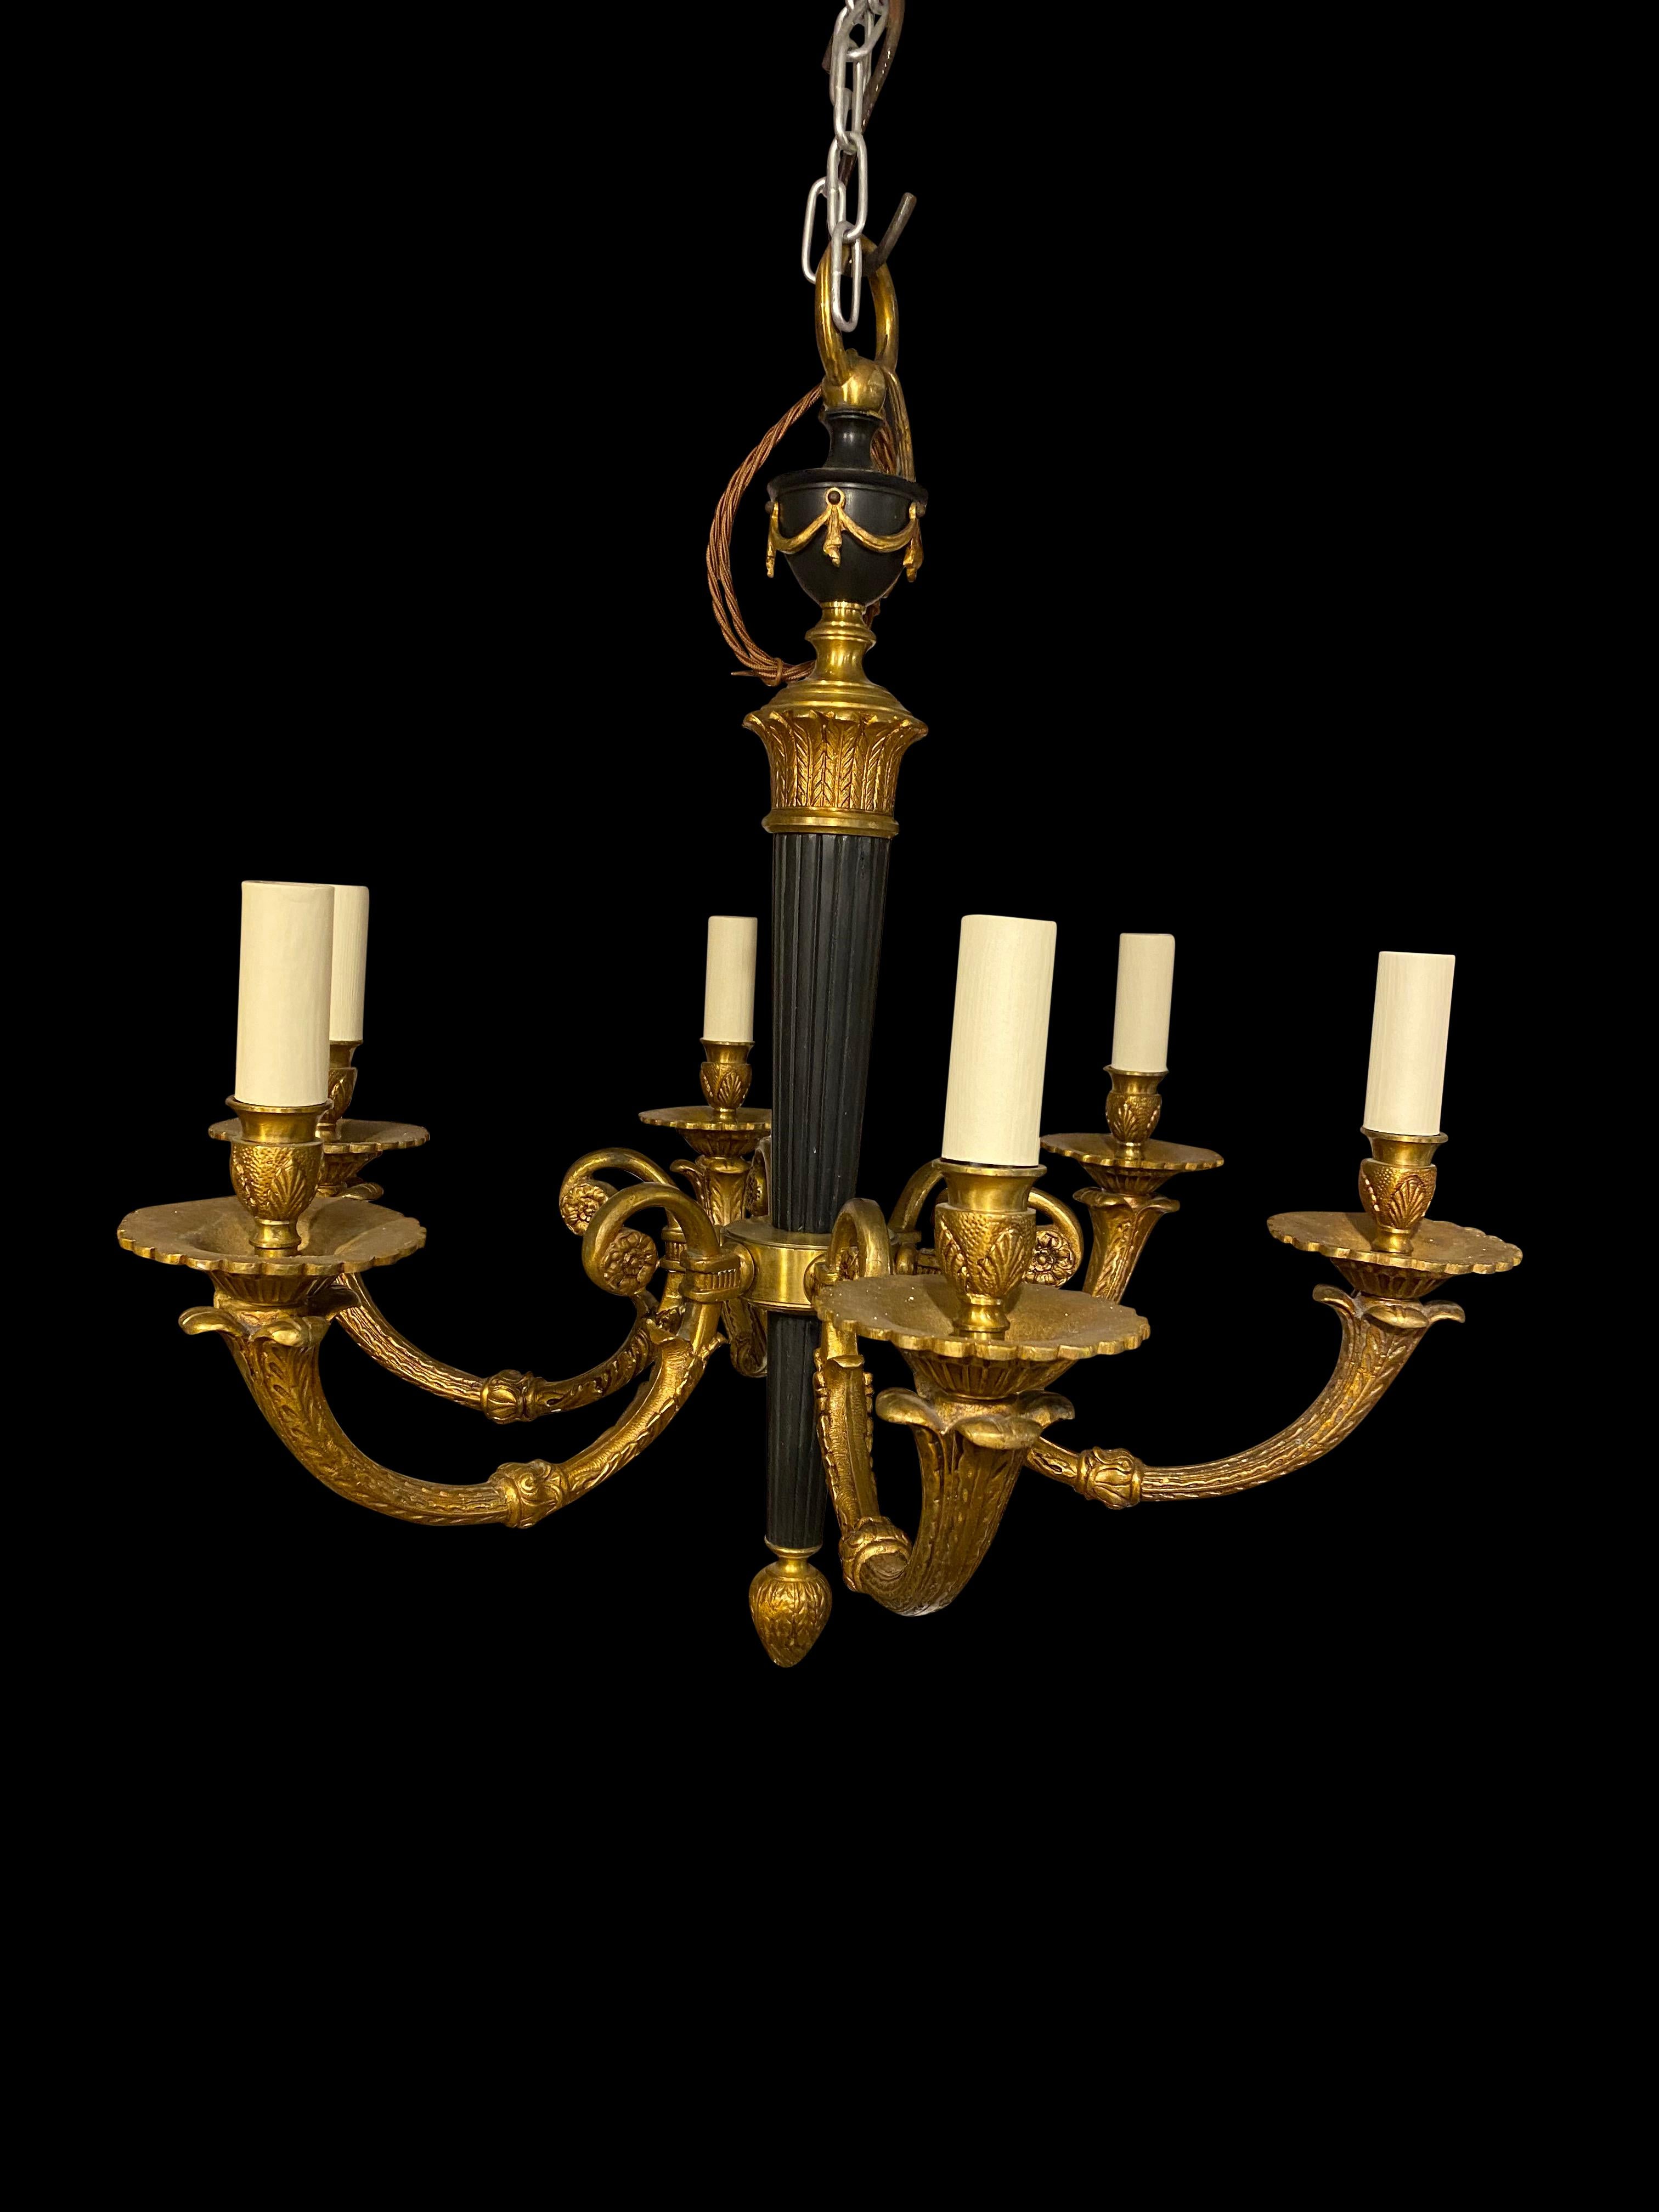 Bronze 19th Century French Empire Chandelier For Sale